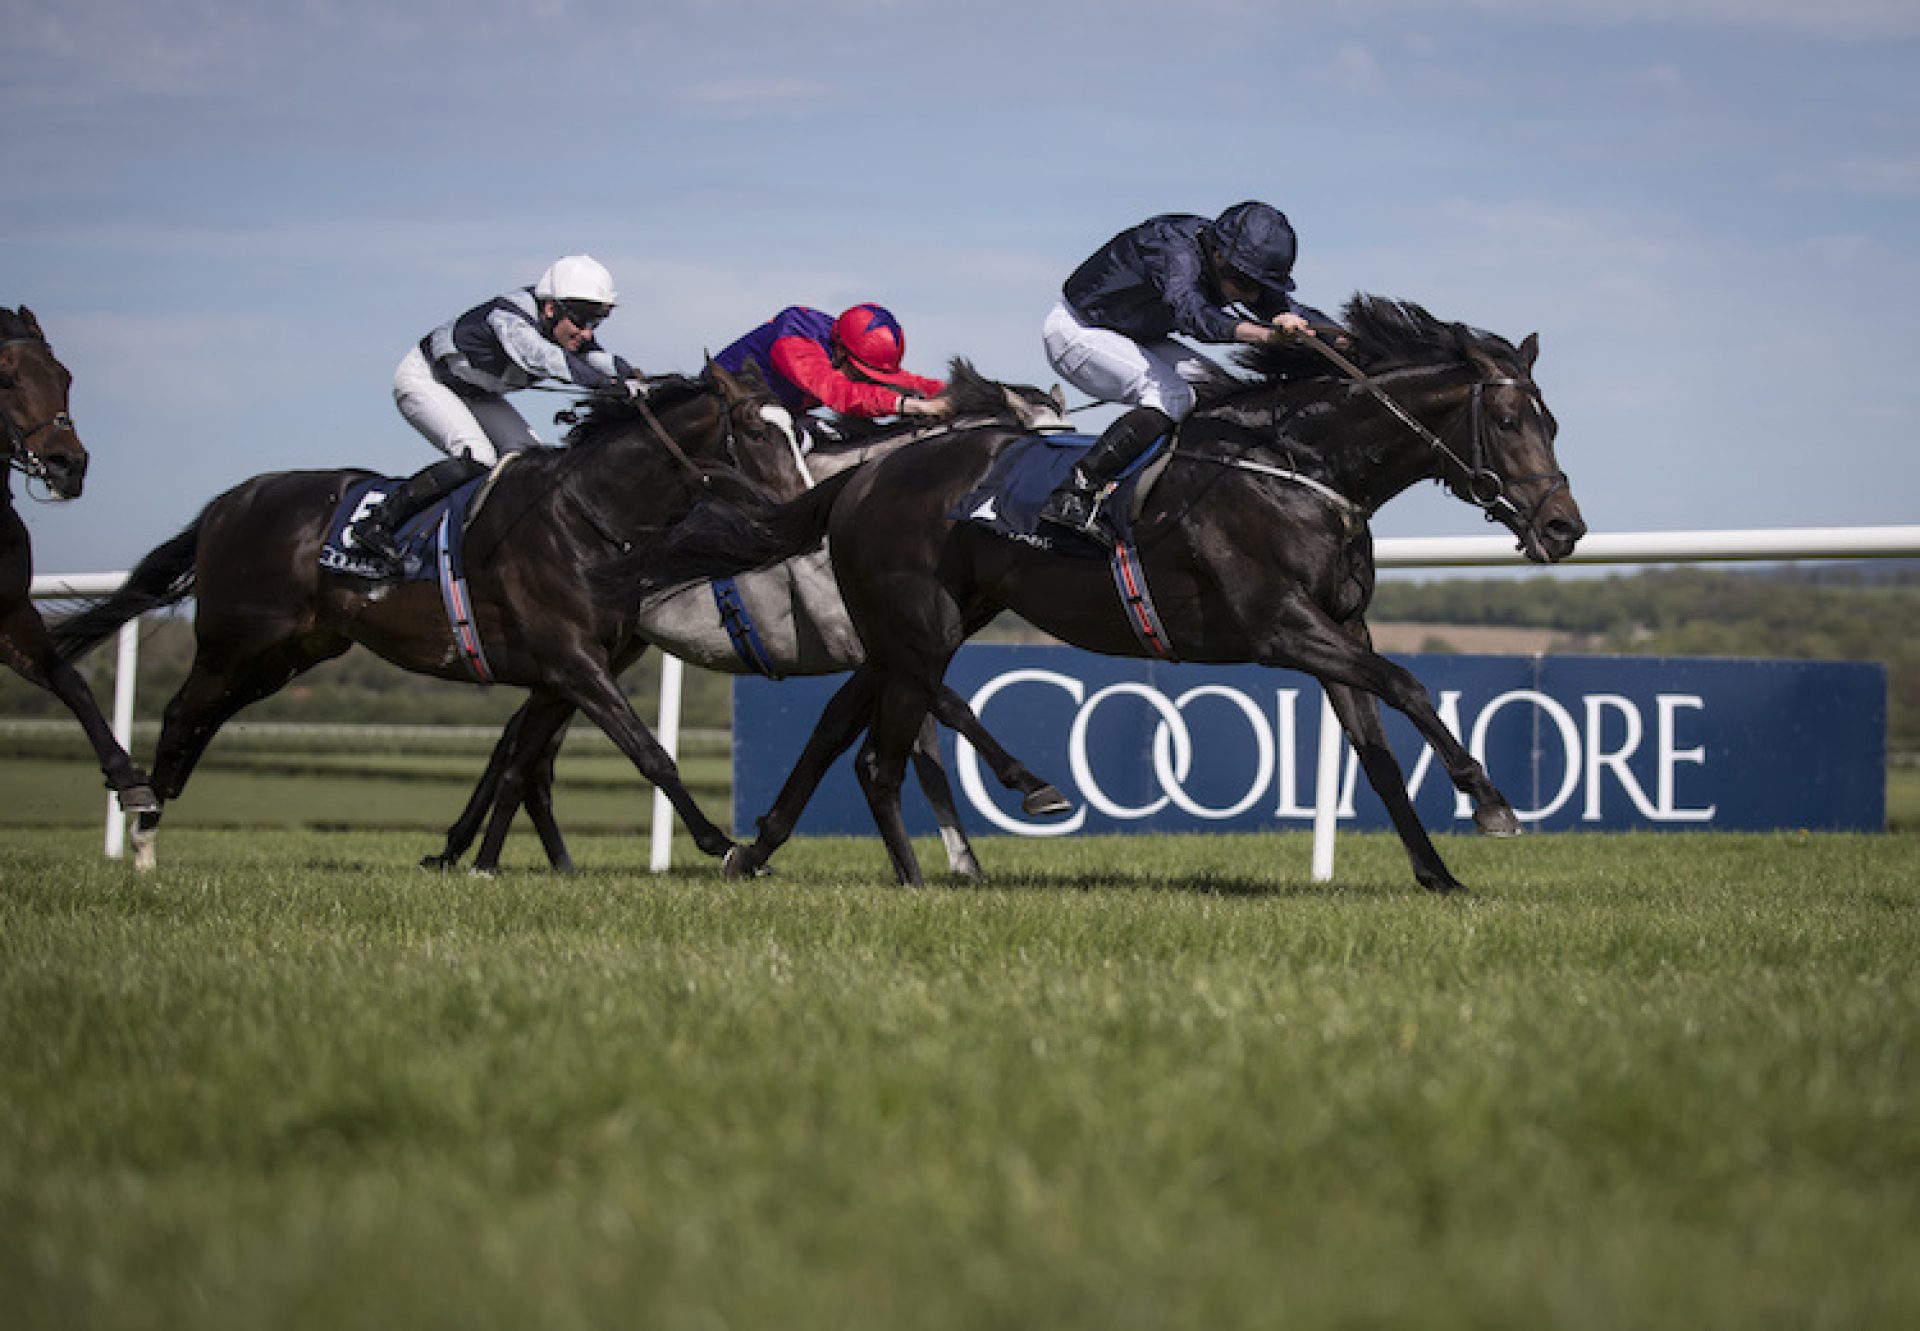 Cliffs Of Moher (Galileo) winning the G2 Morresbridge Stakes at Naas